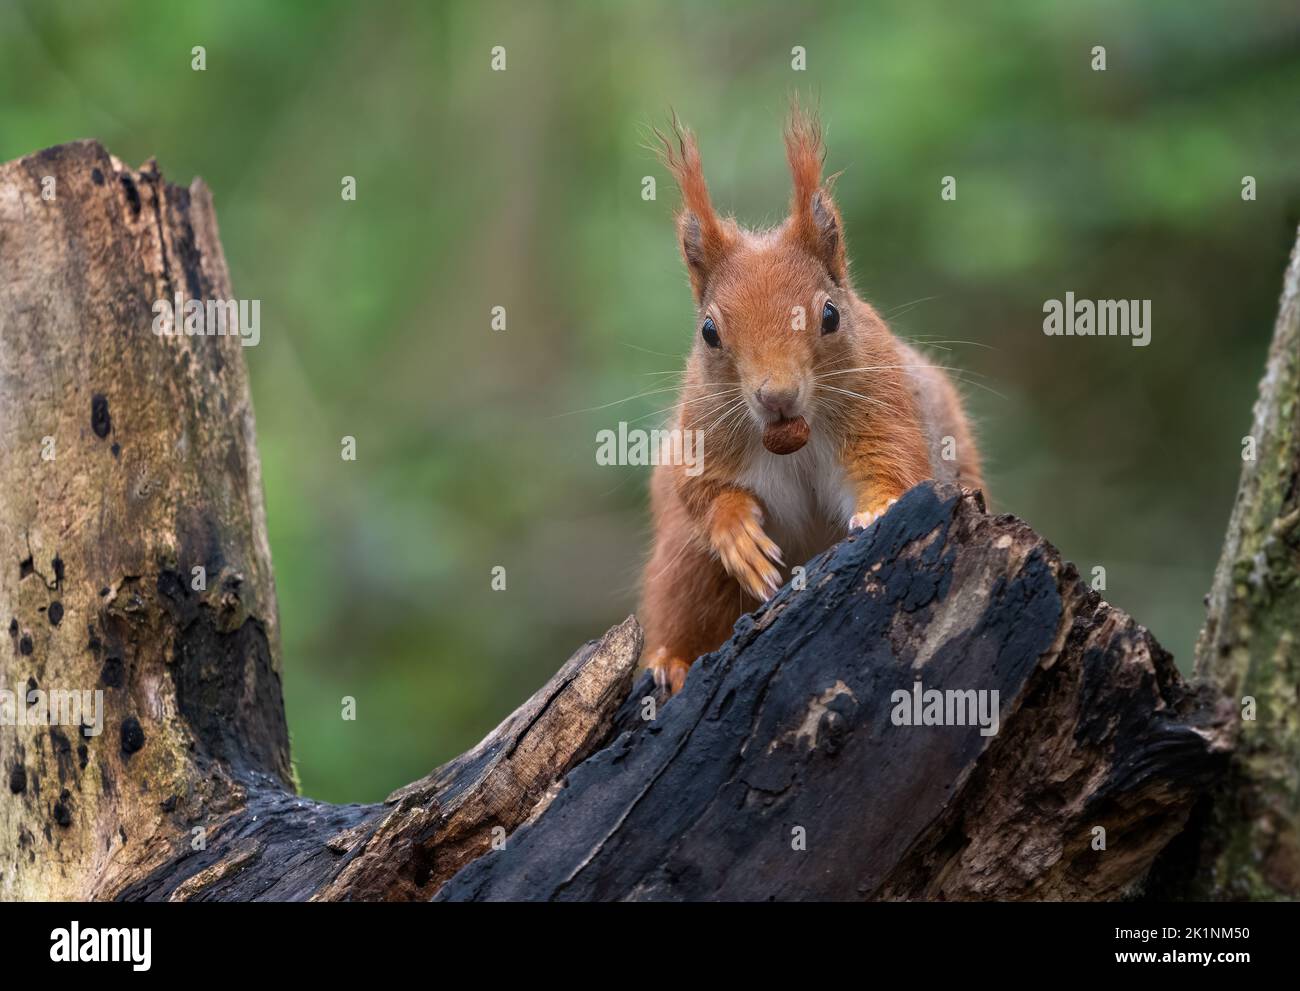 A close up of a red squirrel, Sciurus vulgaris, complete with its ear tufts and with a hazelnut in its mouth. Stock Photo